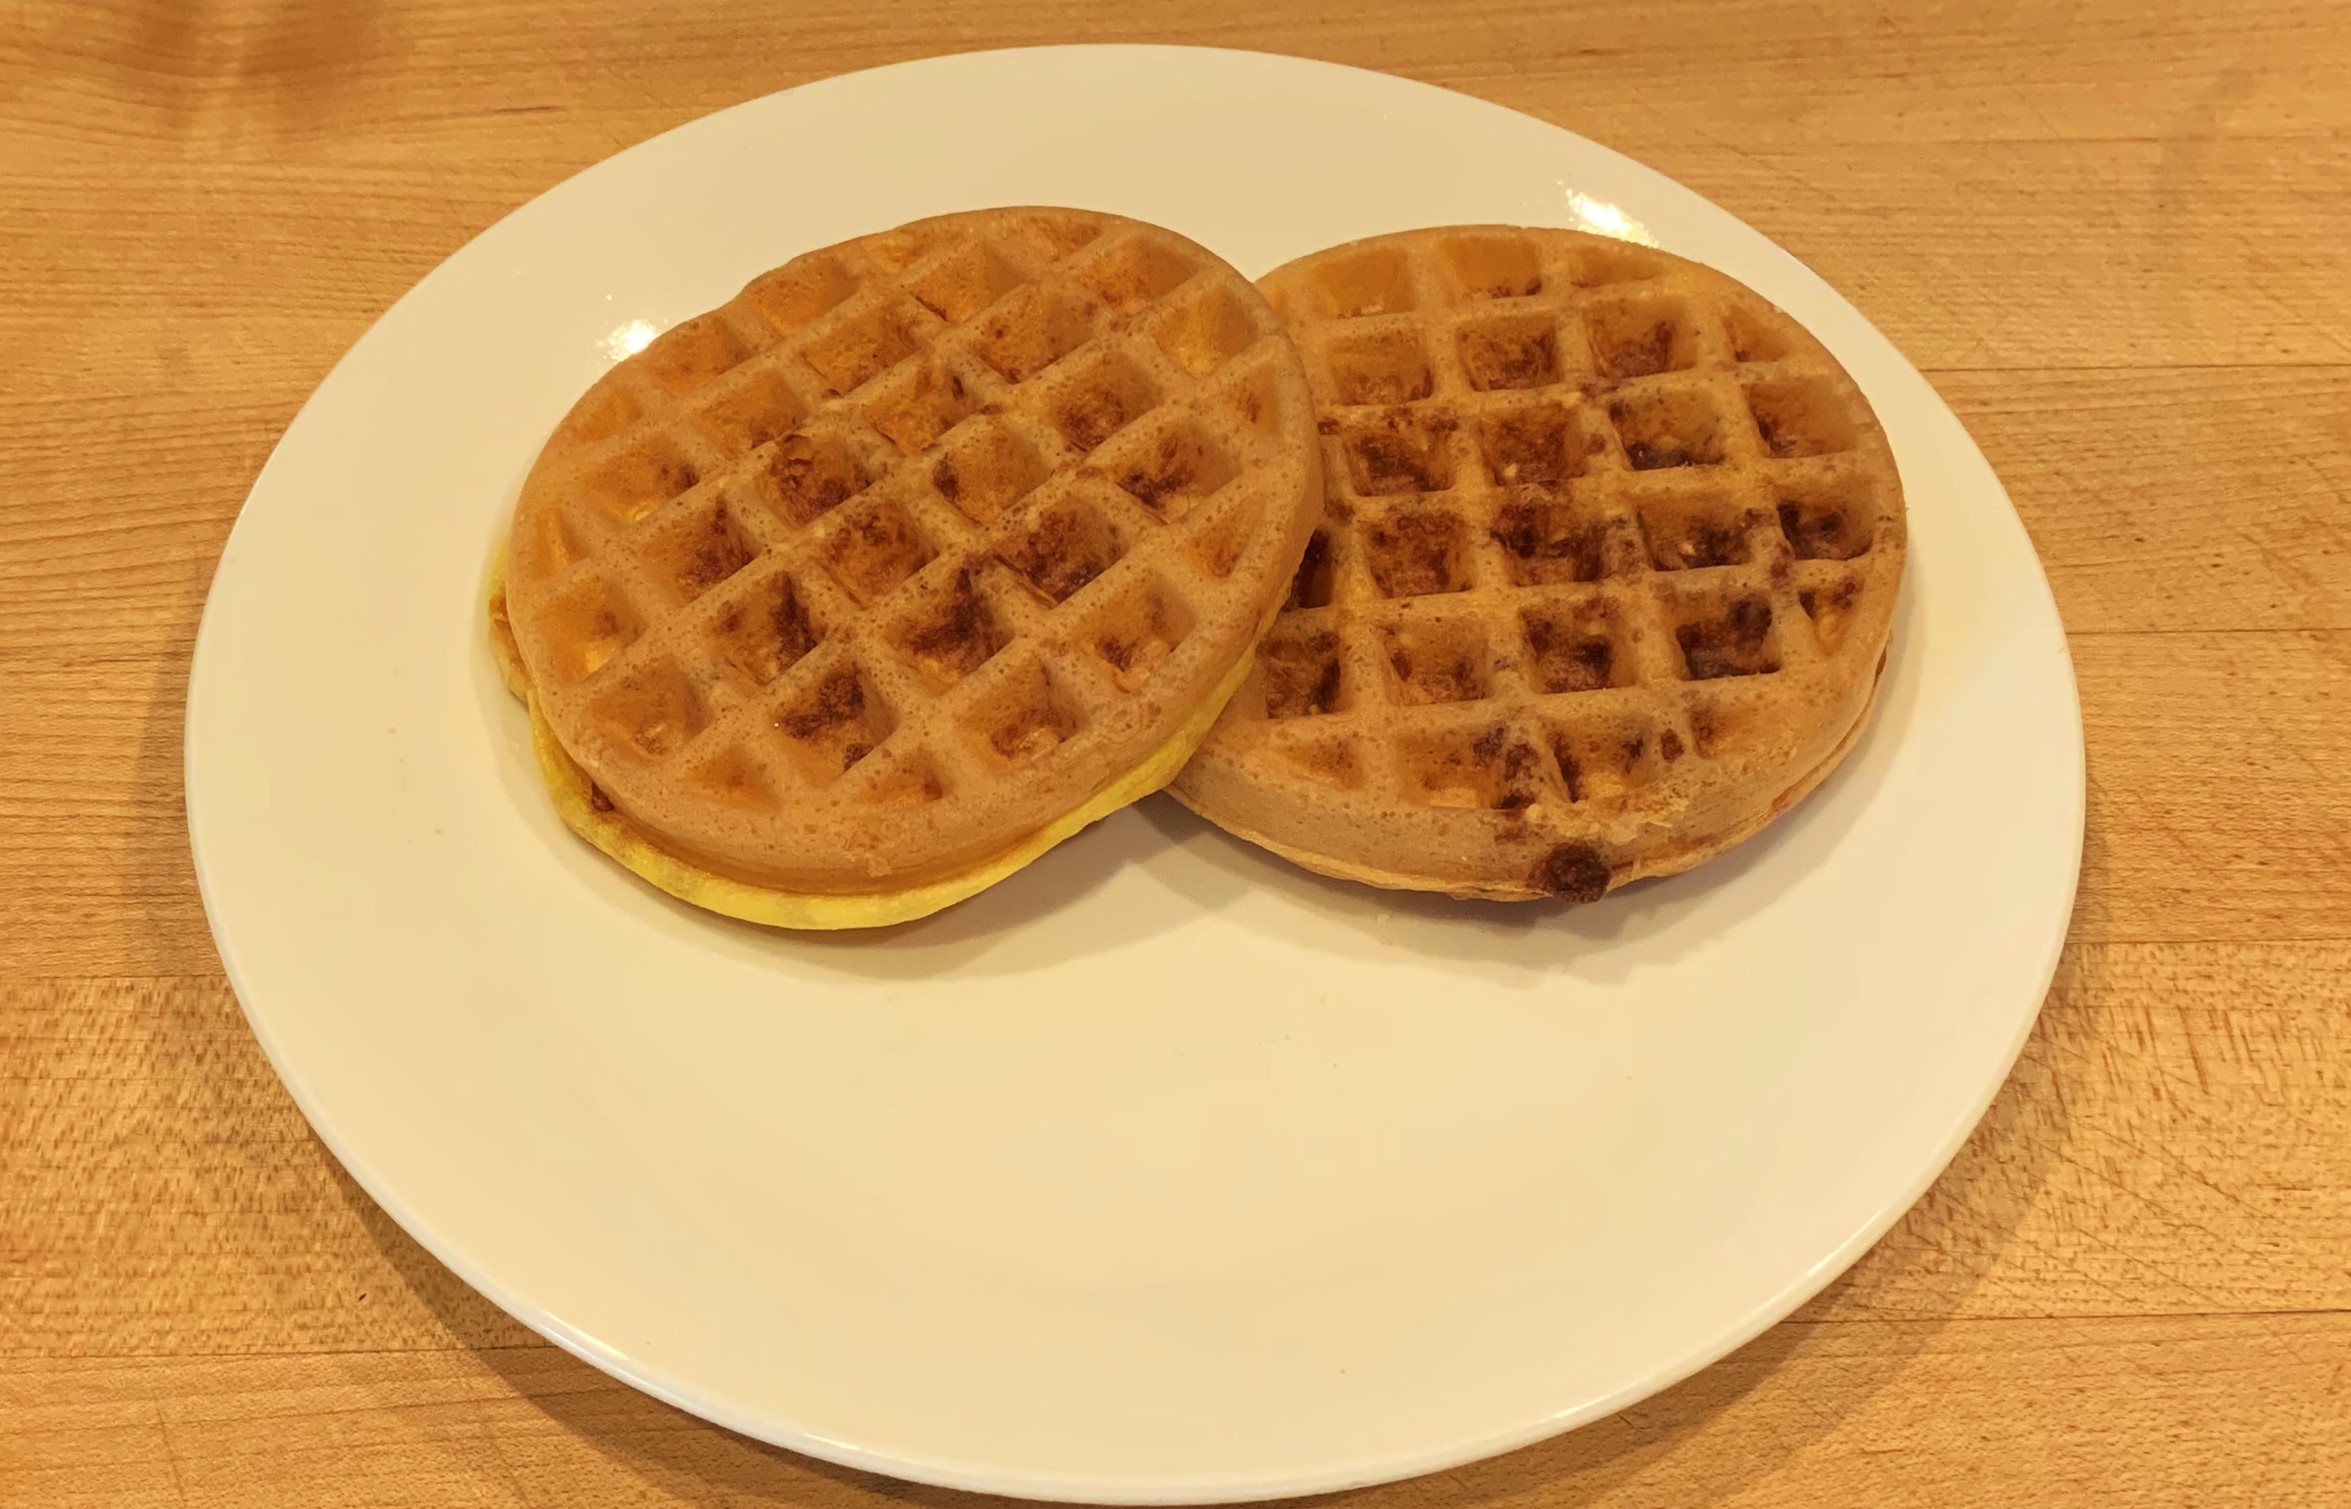 Home Cooks Are Making Everything From Waffles to Burgers on This Mini  Waffle Maker and Griddle